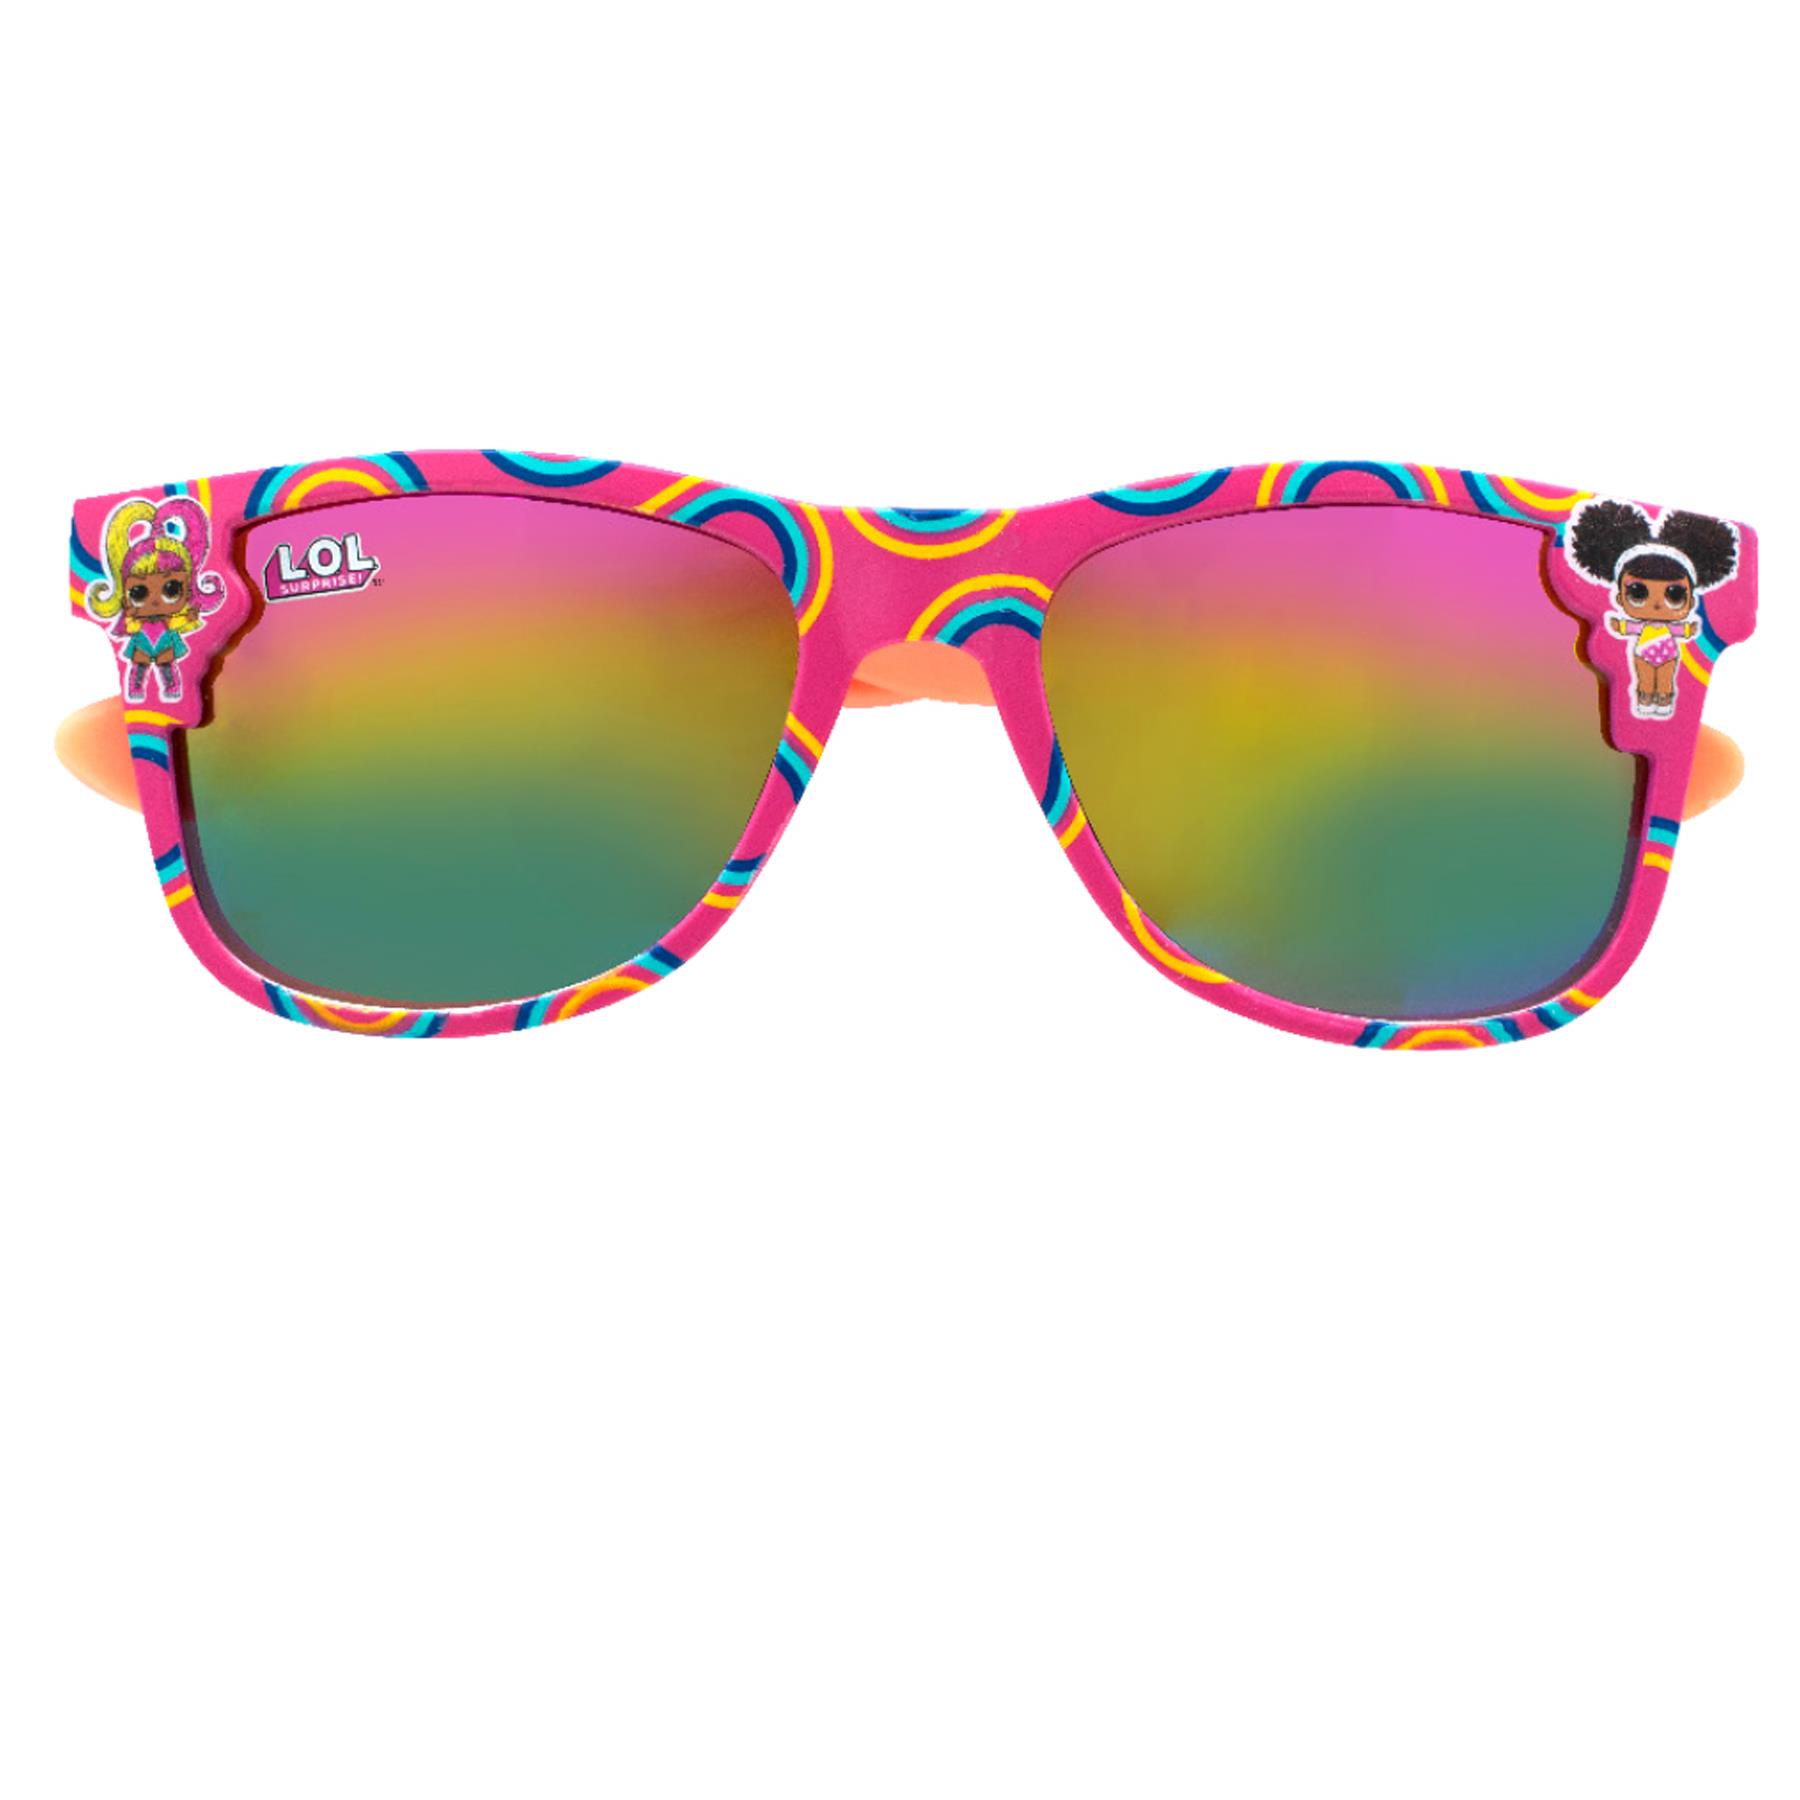 LOL Children's Character Sunglasses UV protection for Holiday - LOL1